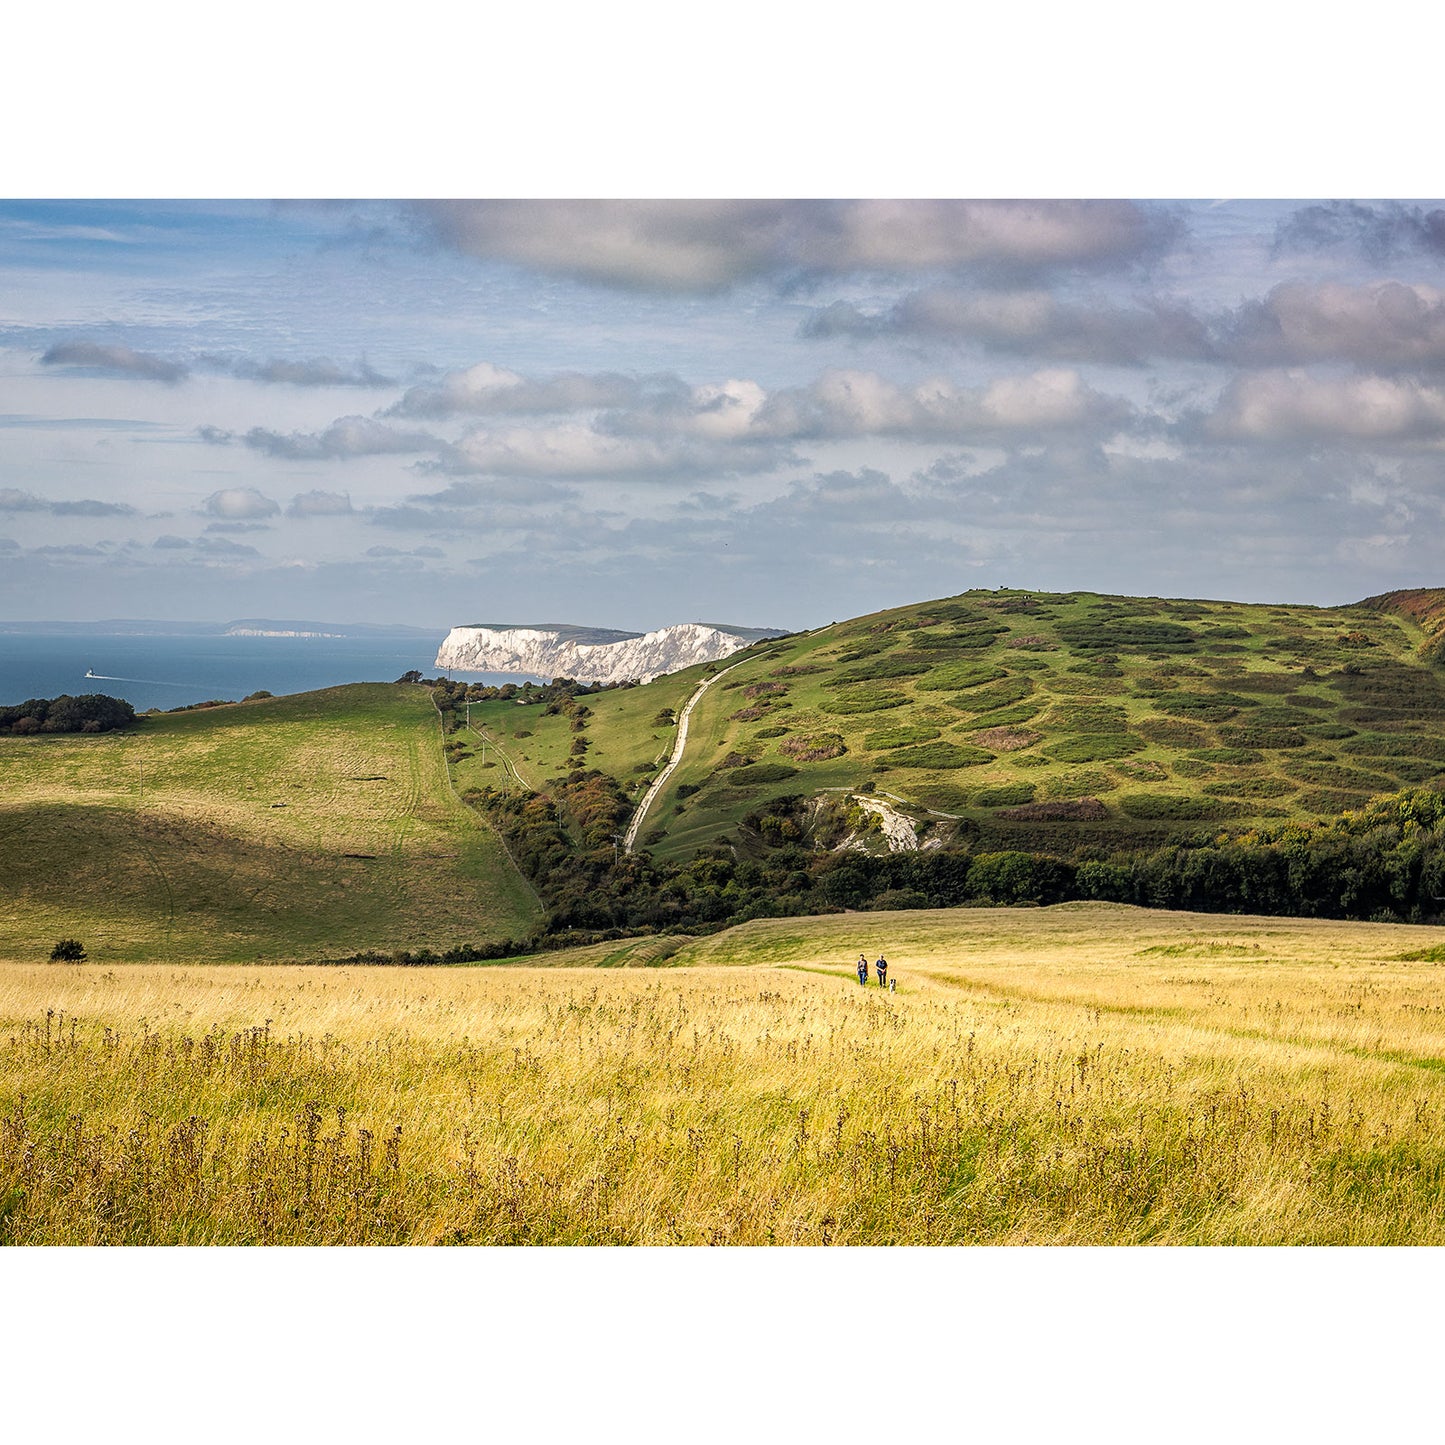 Two people walking on a path through rolling grassy hills with cliffs in the distance on the Isle of Gascoigne, captured in "View over West Wight" by Available Light Photography.